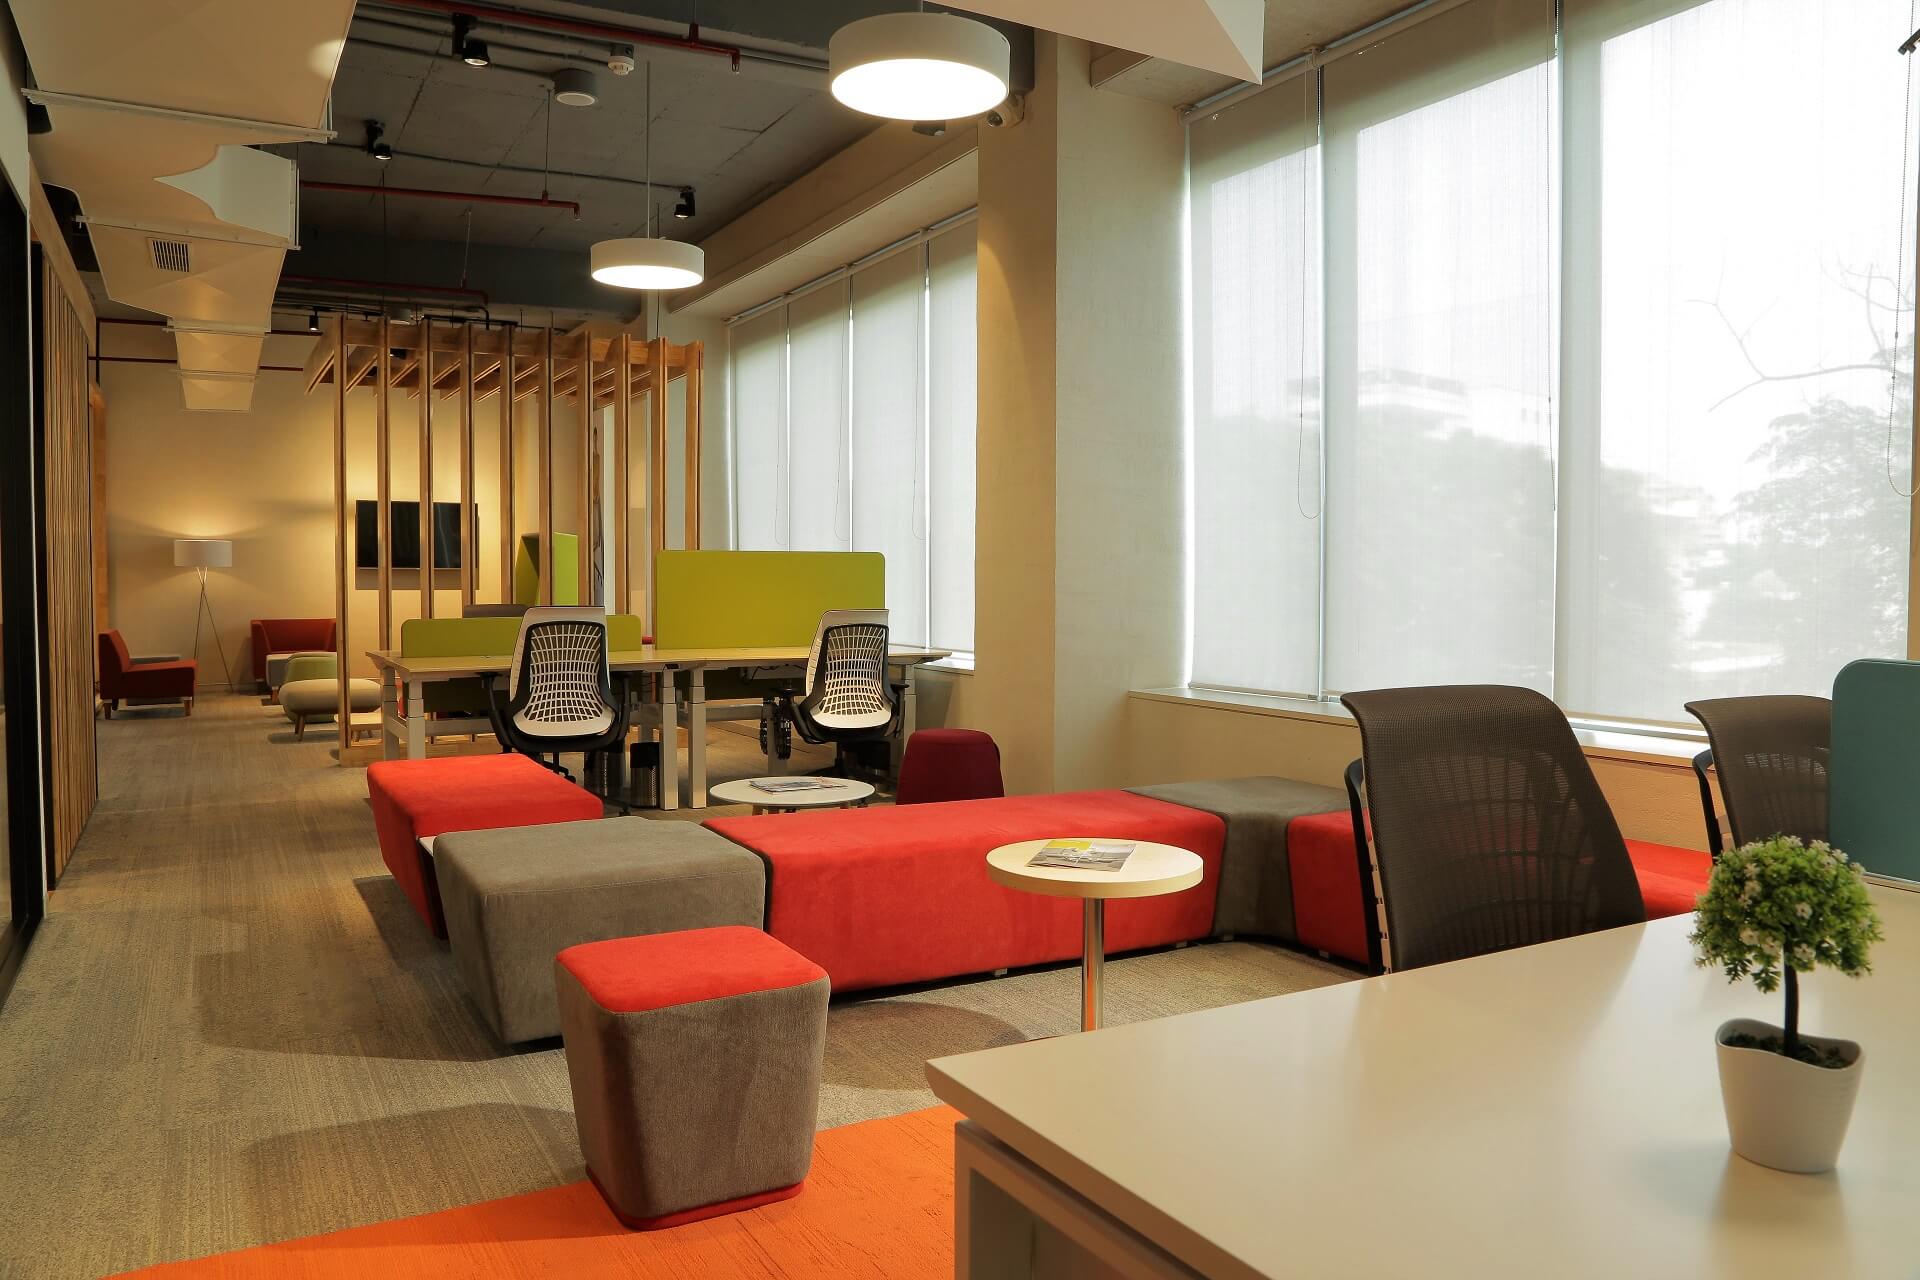 HNI Office interior by Praxis Design Solutions